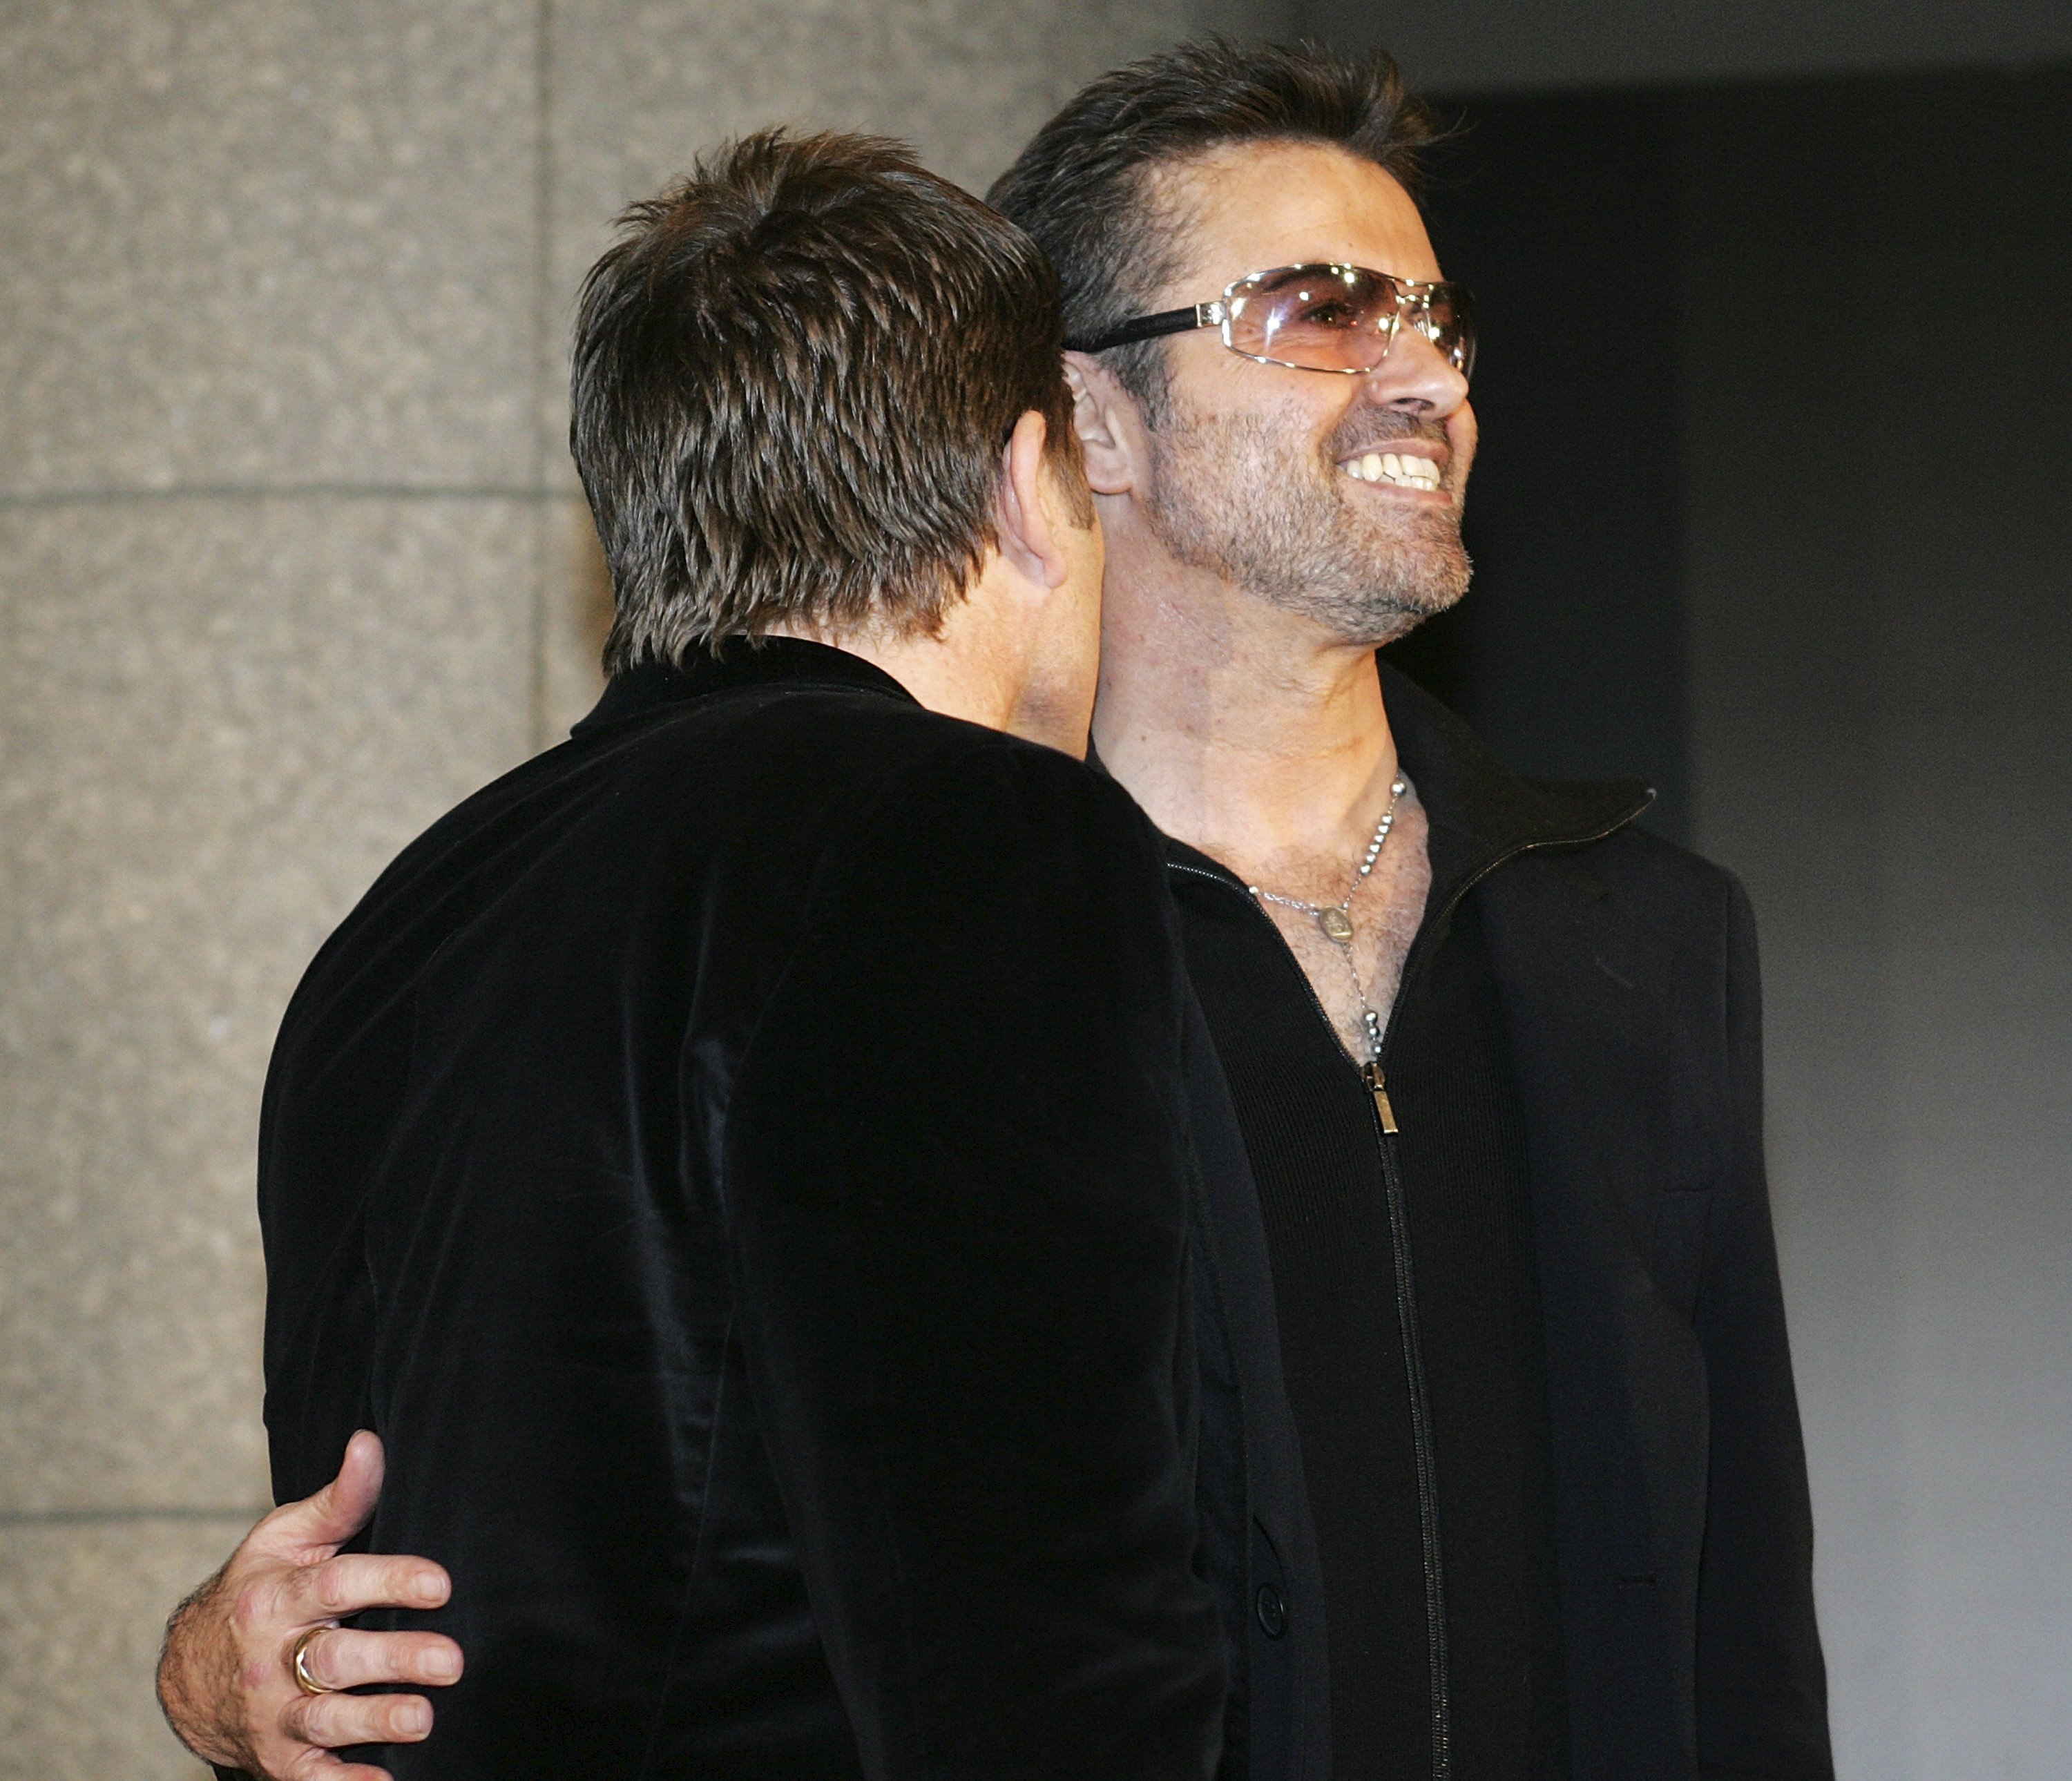 George Michael and Kenny Goss at the the Japanese Premiere of his film "A Different Story" on December 15, 2005 in Tokyo, Japan.  | Source: Getty Images